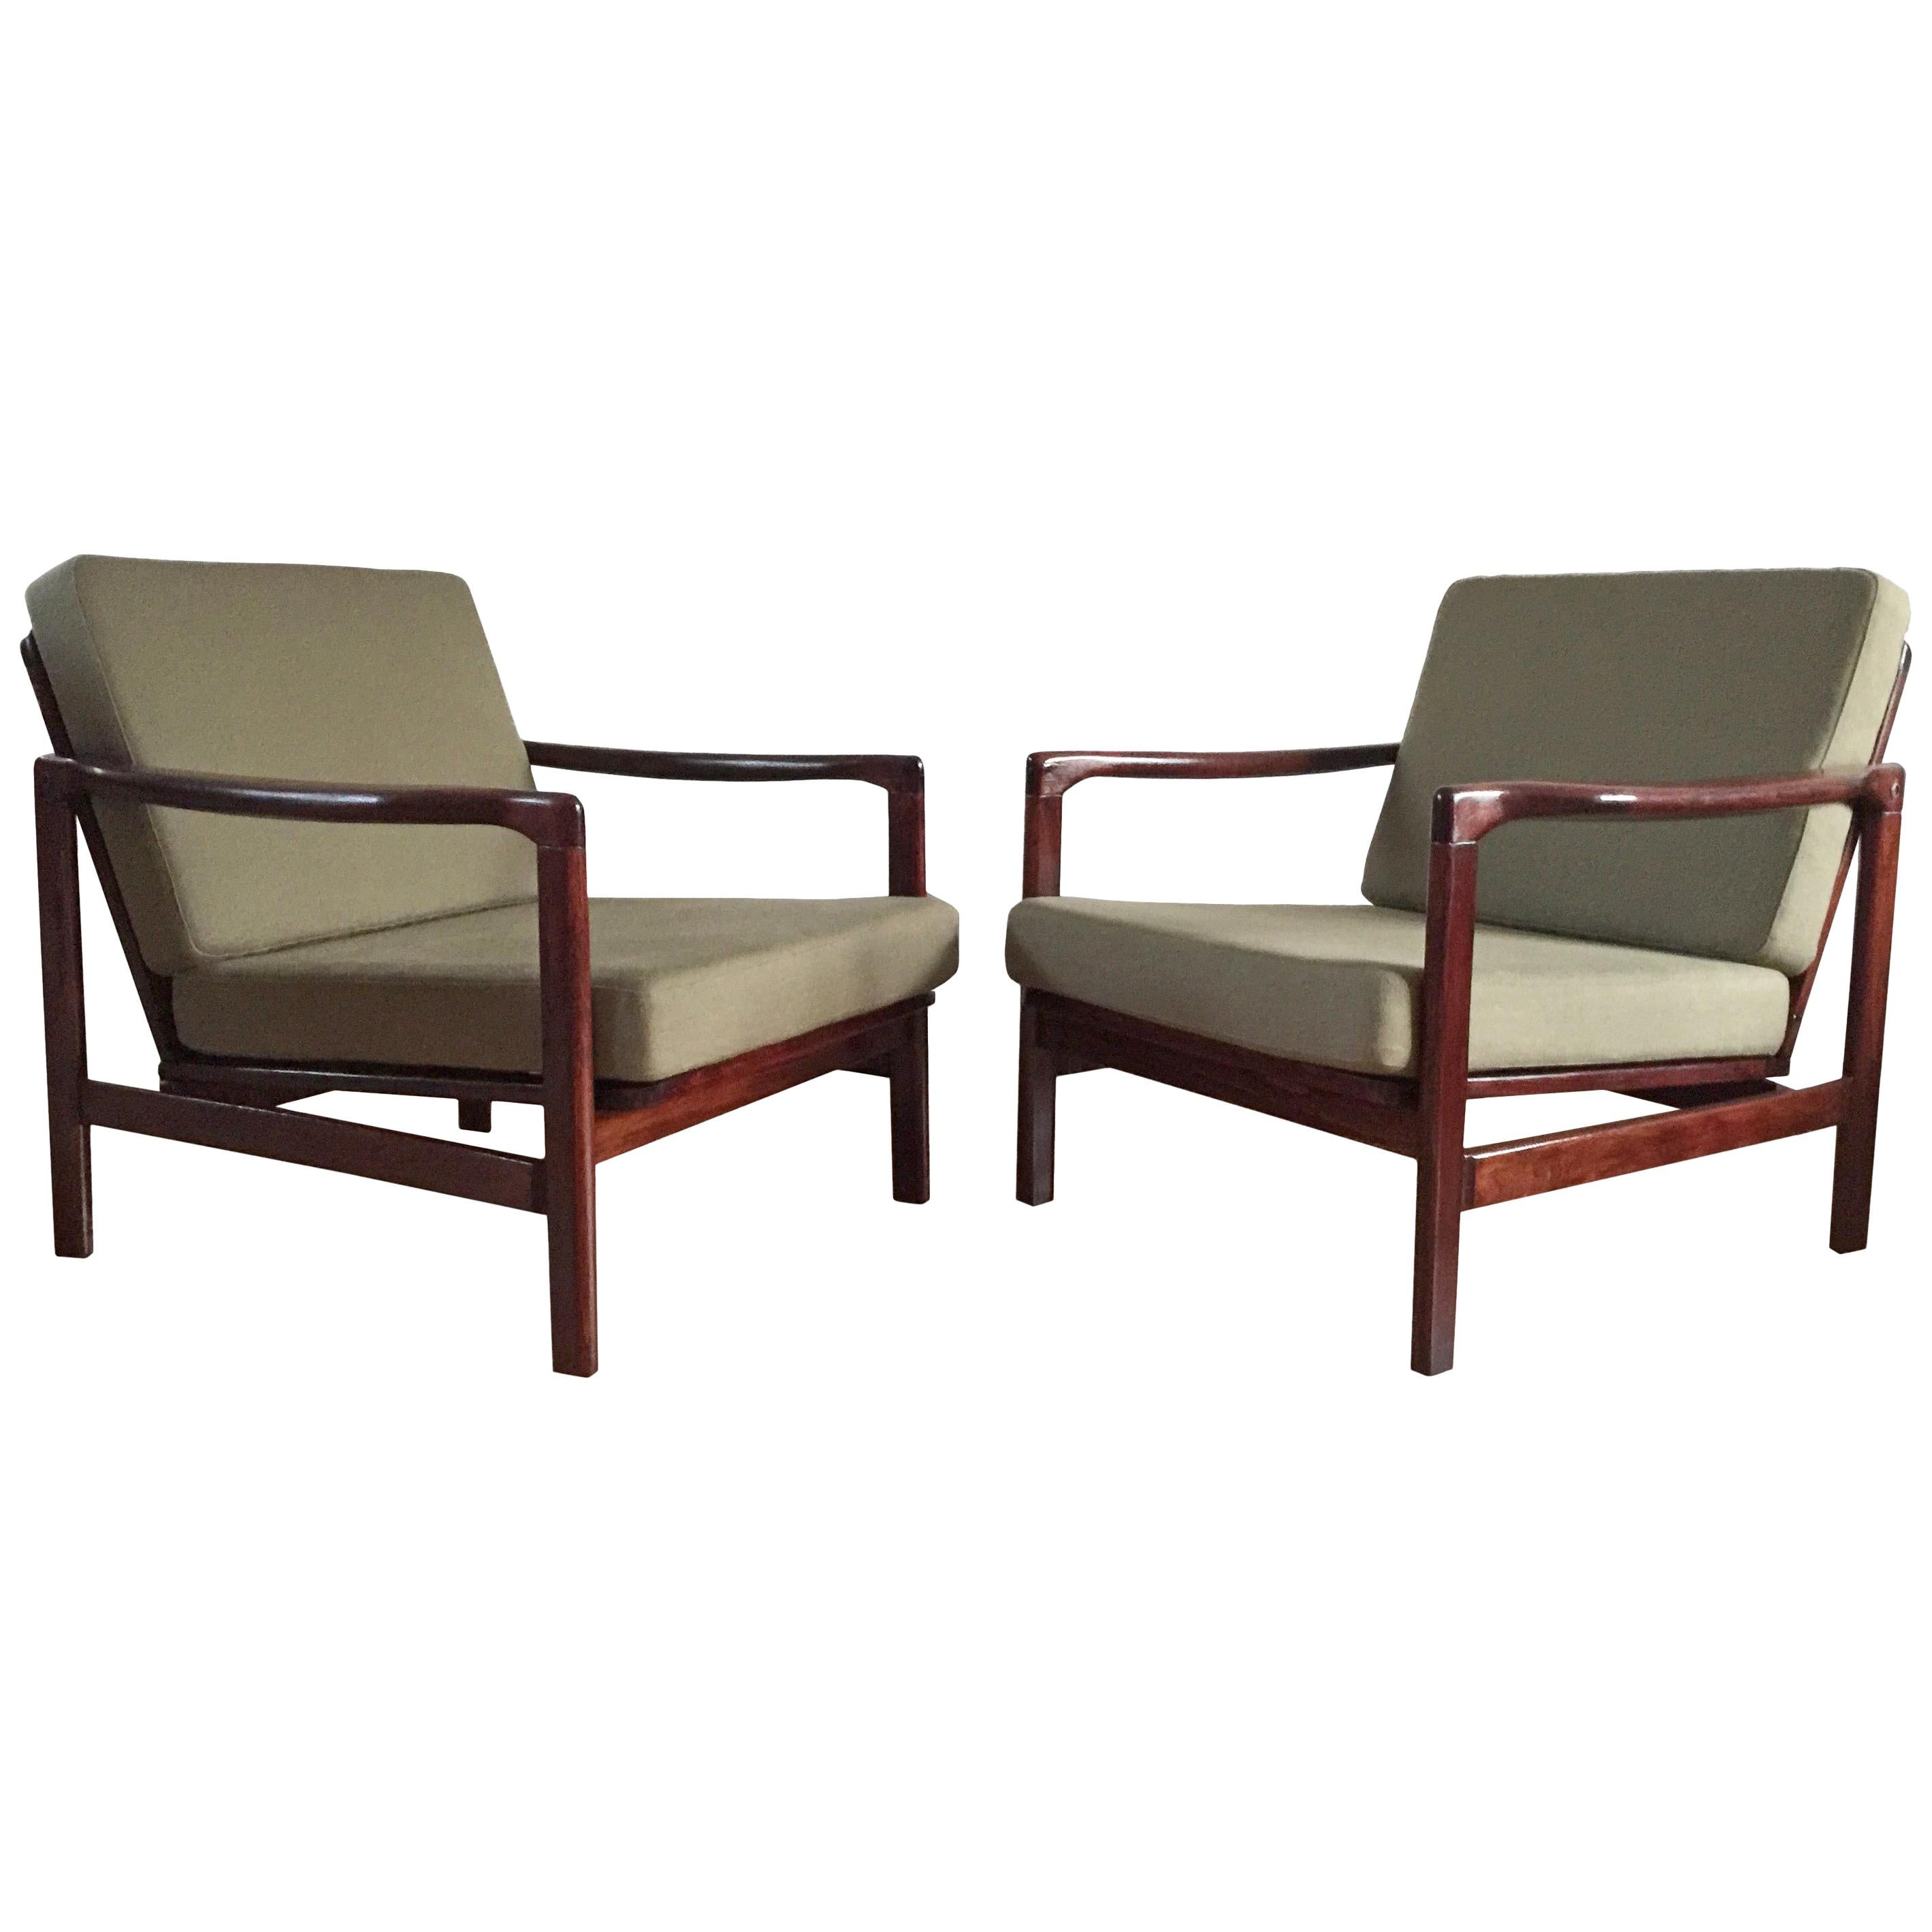 Midcentury Lounge Armchairs Set in Olive Linen, Zenon Bączyk, 1960s For Sale